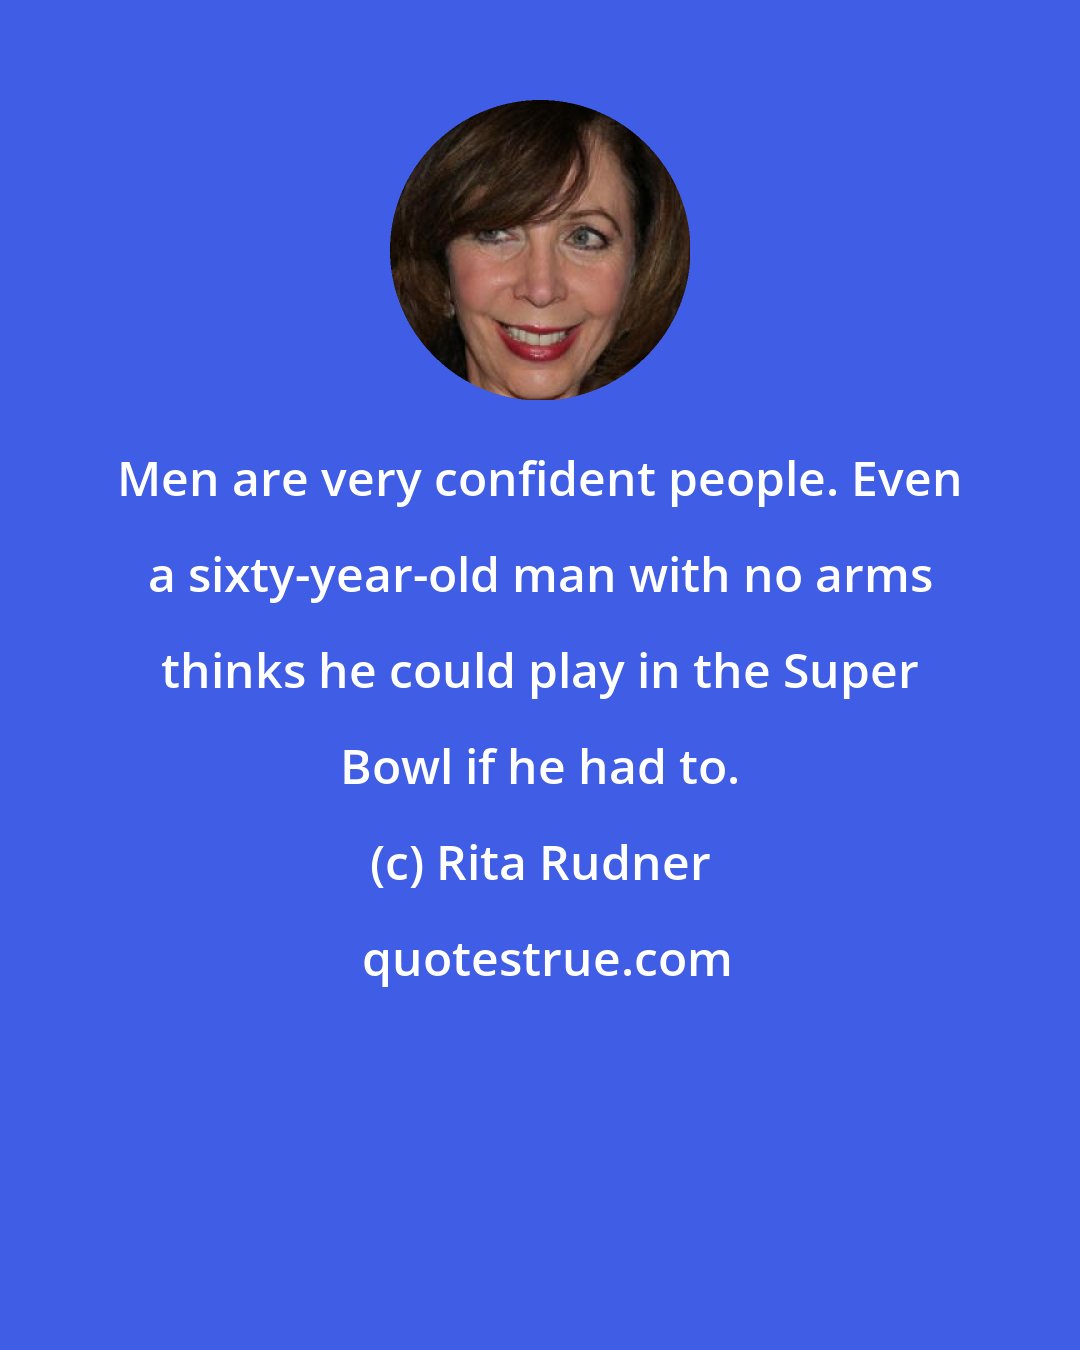 Rita Rudner: Men are very confident people. Even a sixty-year-old man with no arms thinks he could play in the Super Bowl if he had to.